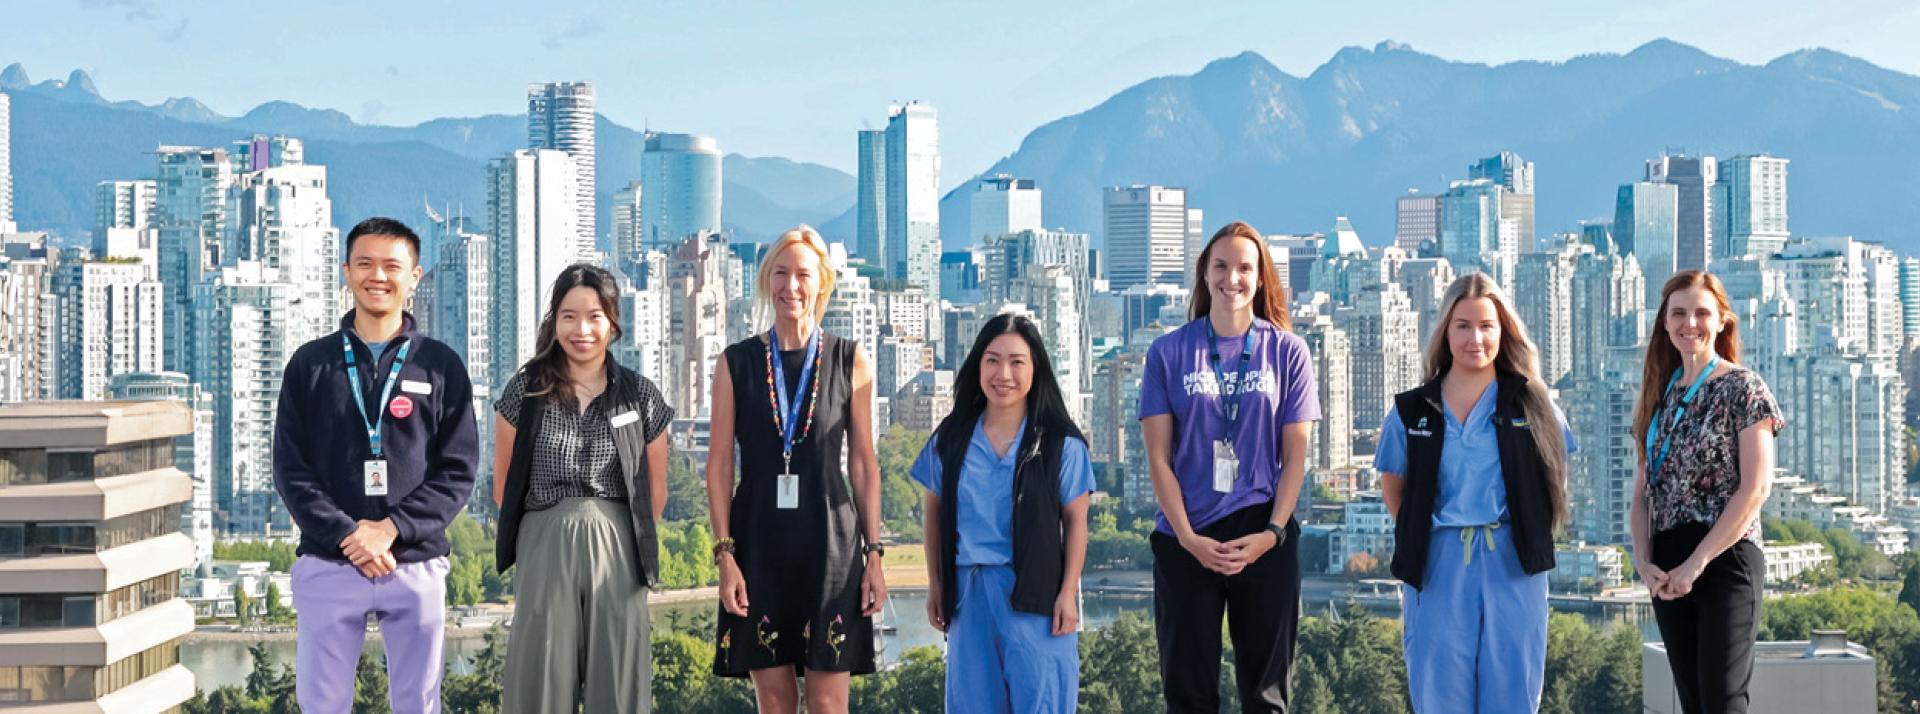 Allied health workers standing in front of the Vancouver skyline